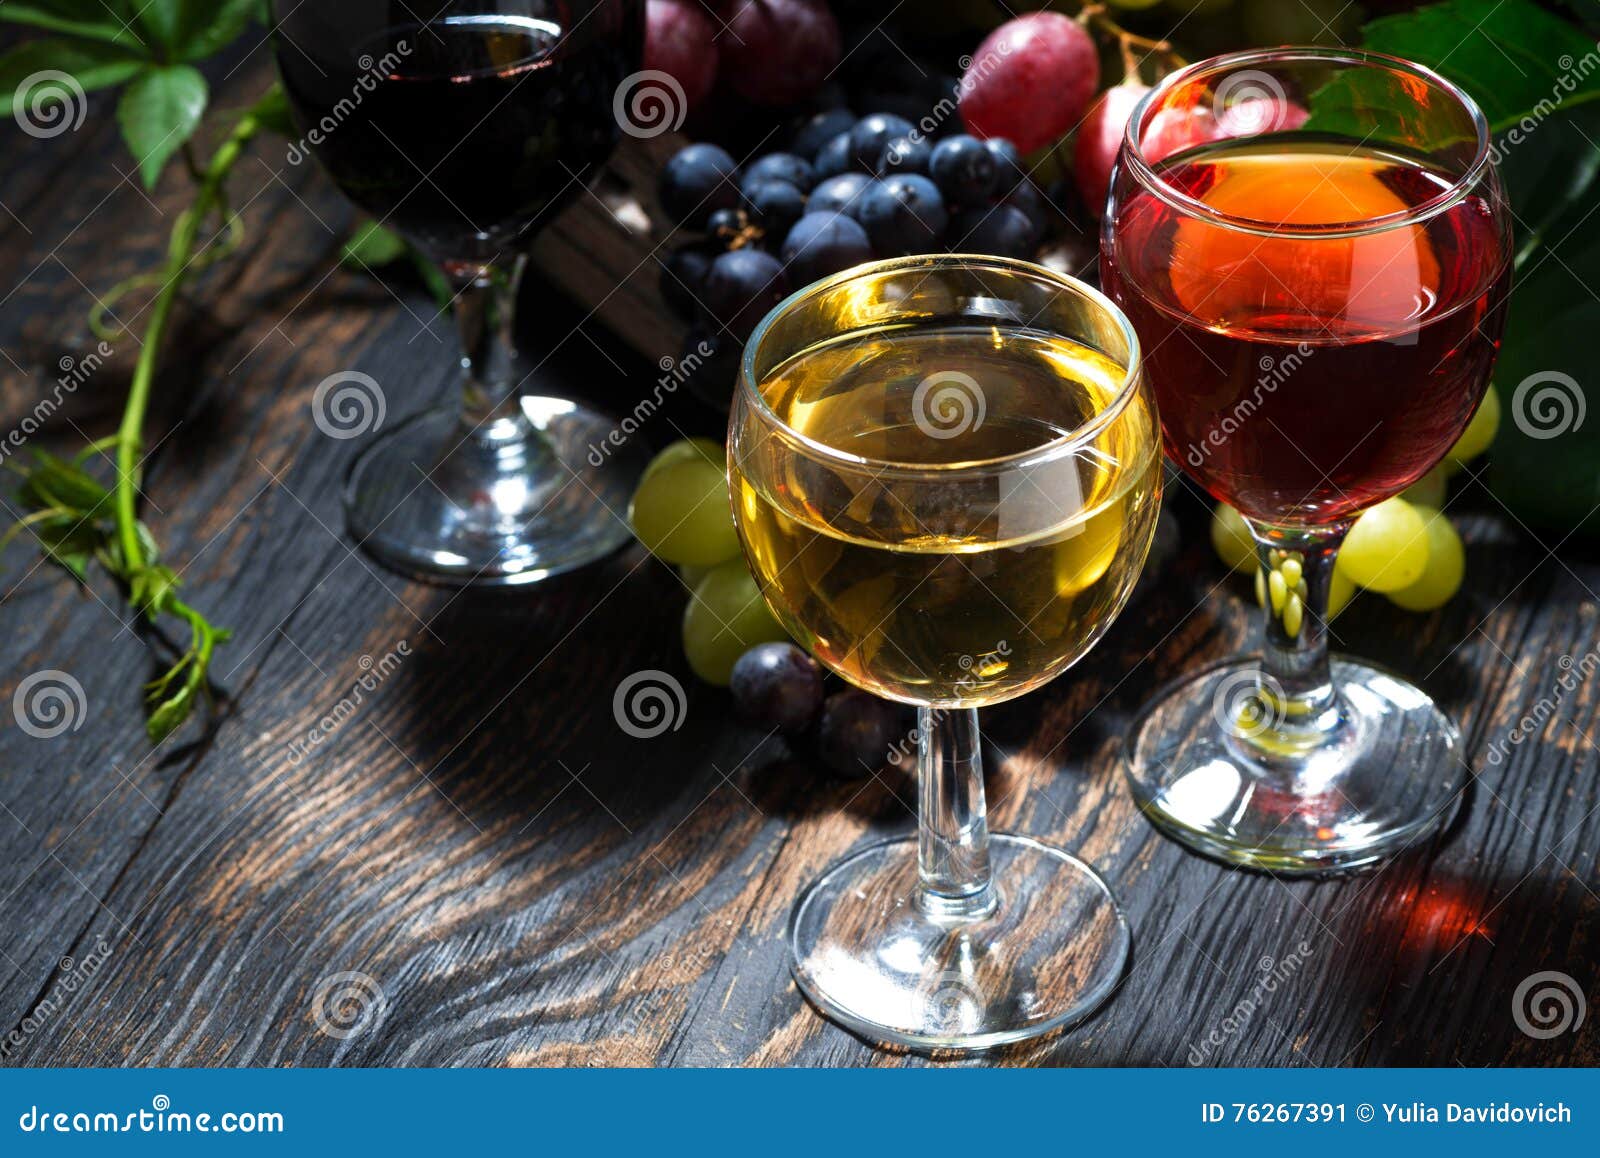 Assortment Different Wine on Dark Wooden Table, Top View Stock Image ...